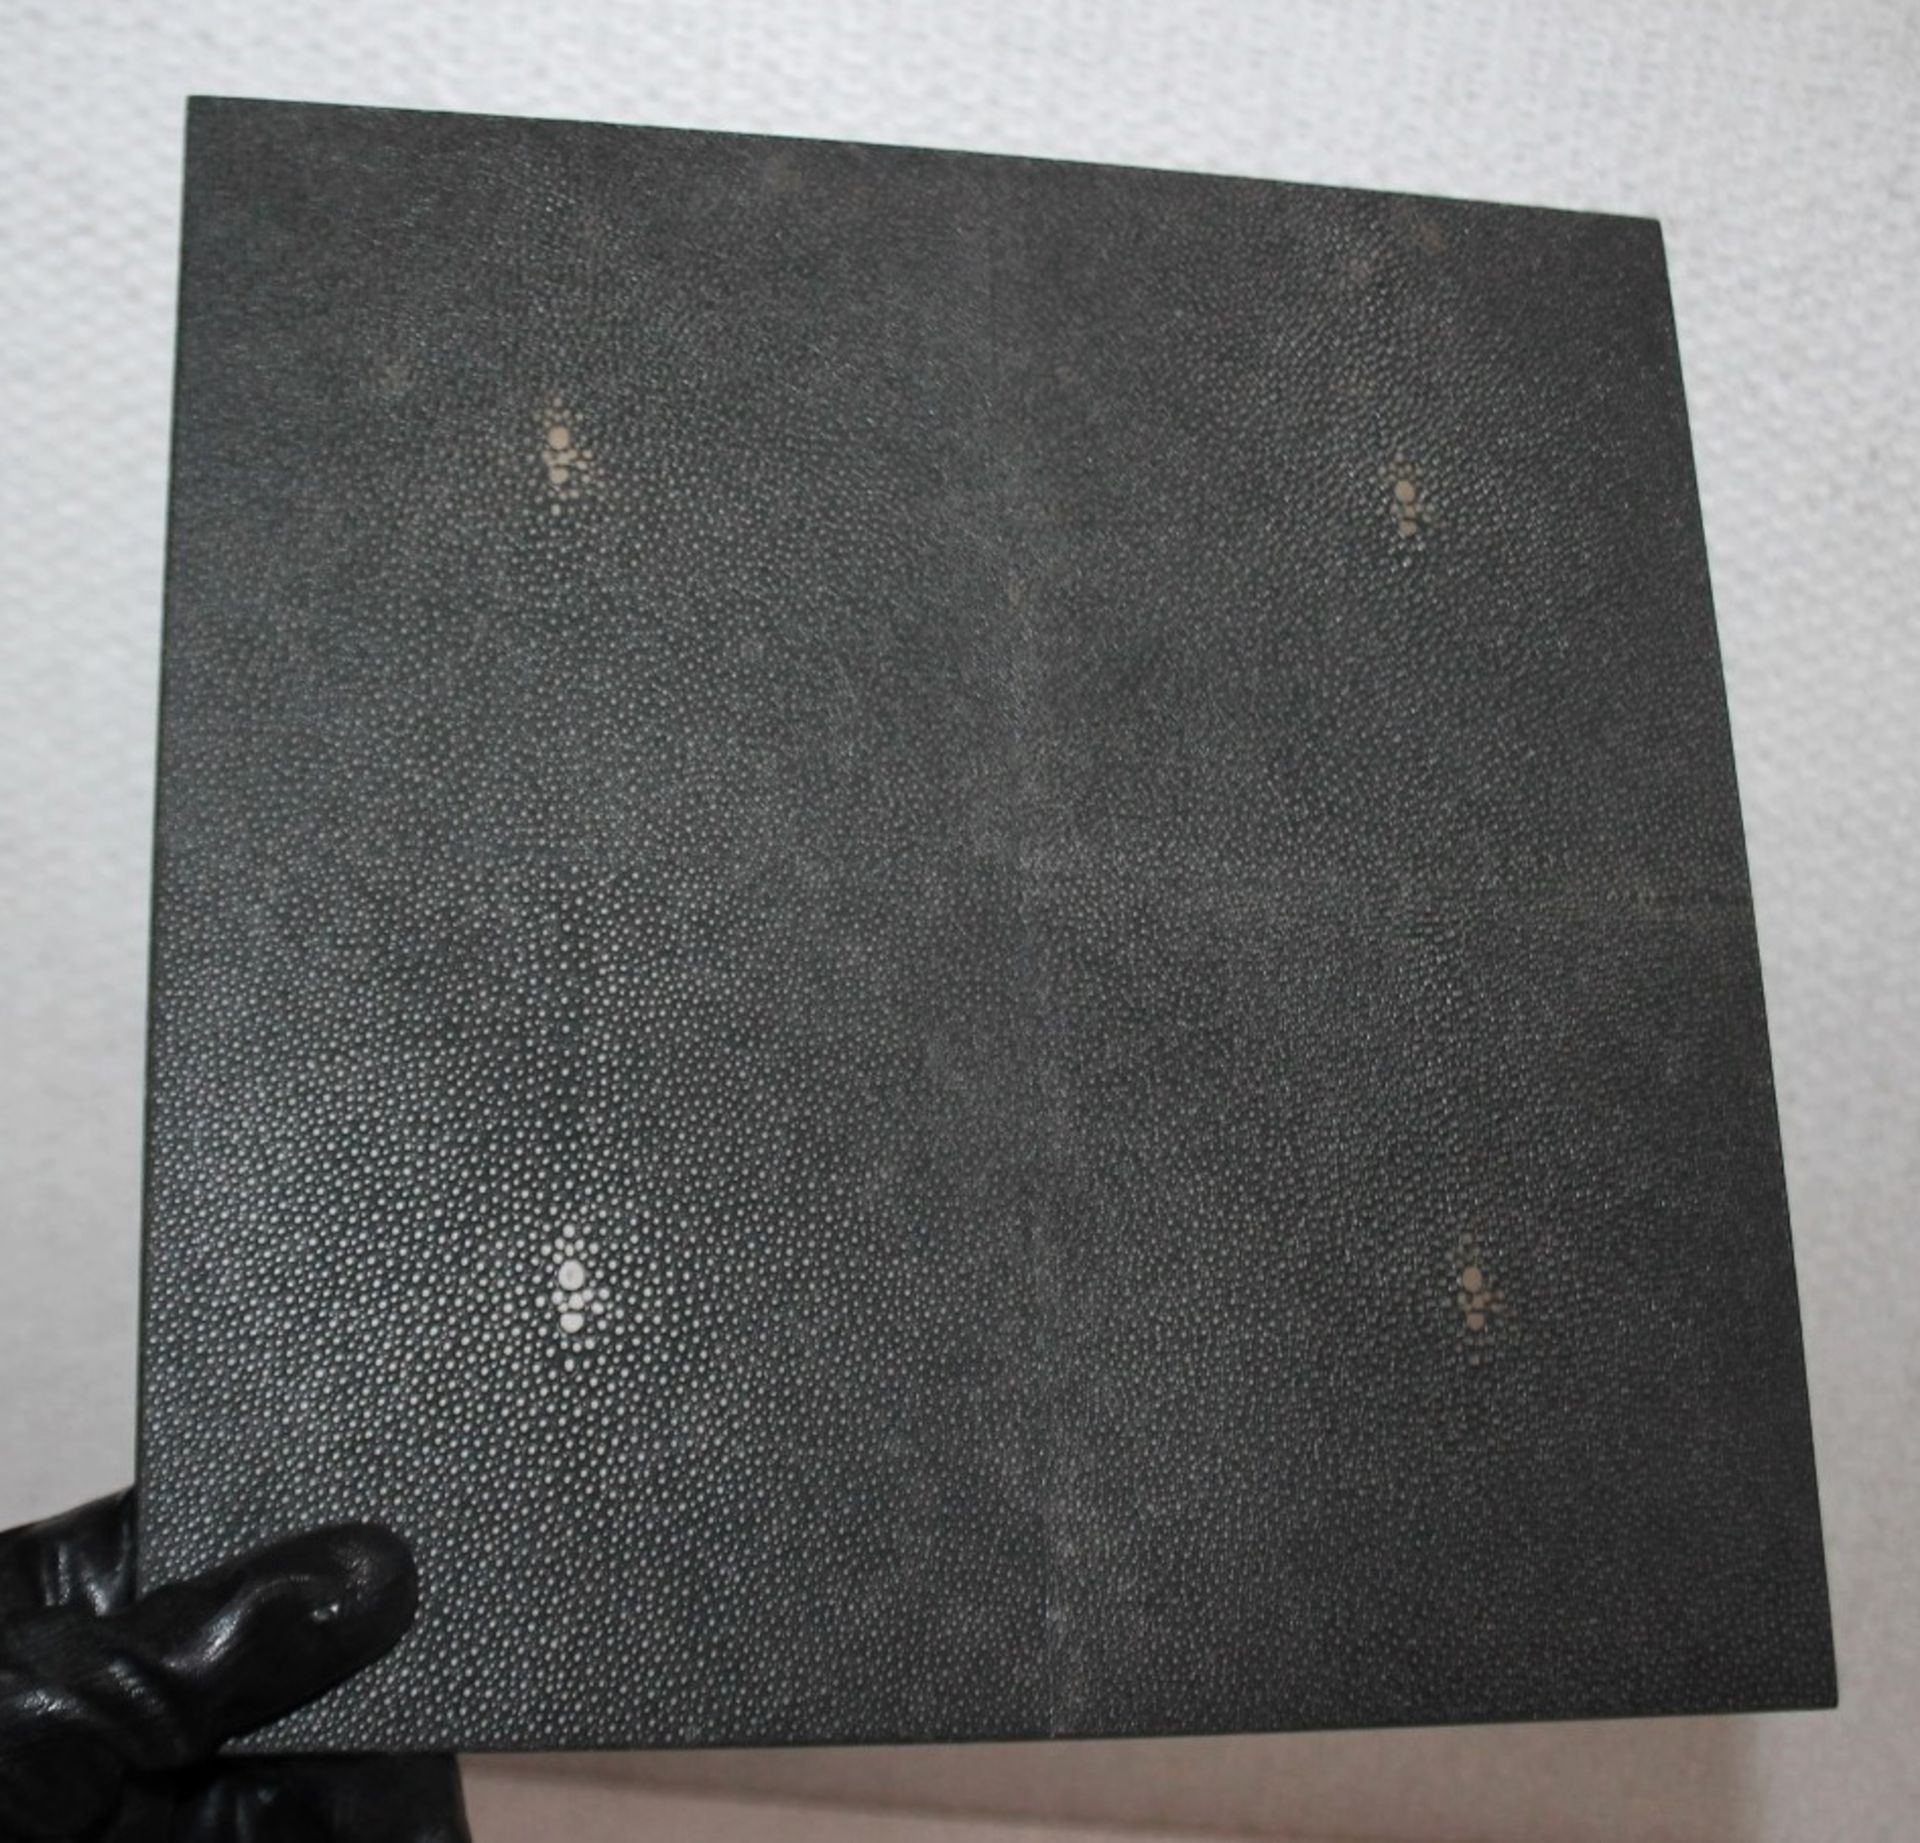 5 x POSH TRADING COMPANY Coastbox with Faux Shagreen Double Coaster Place Mats - Current Retail - Image 2 of 5